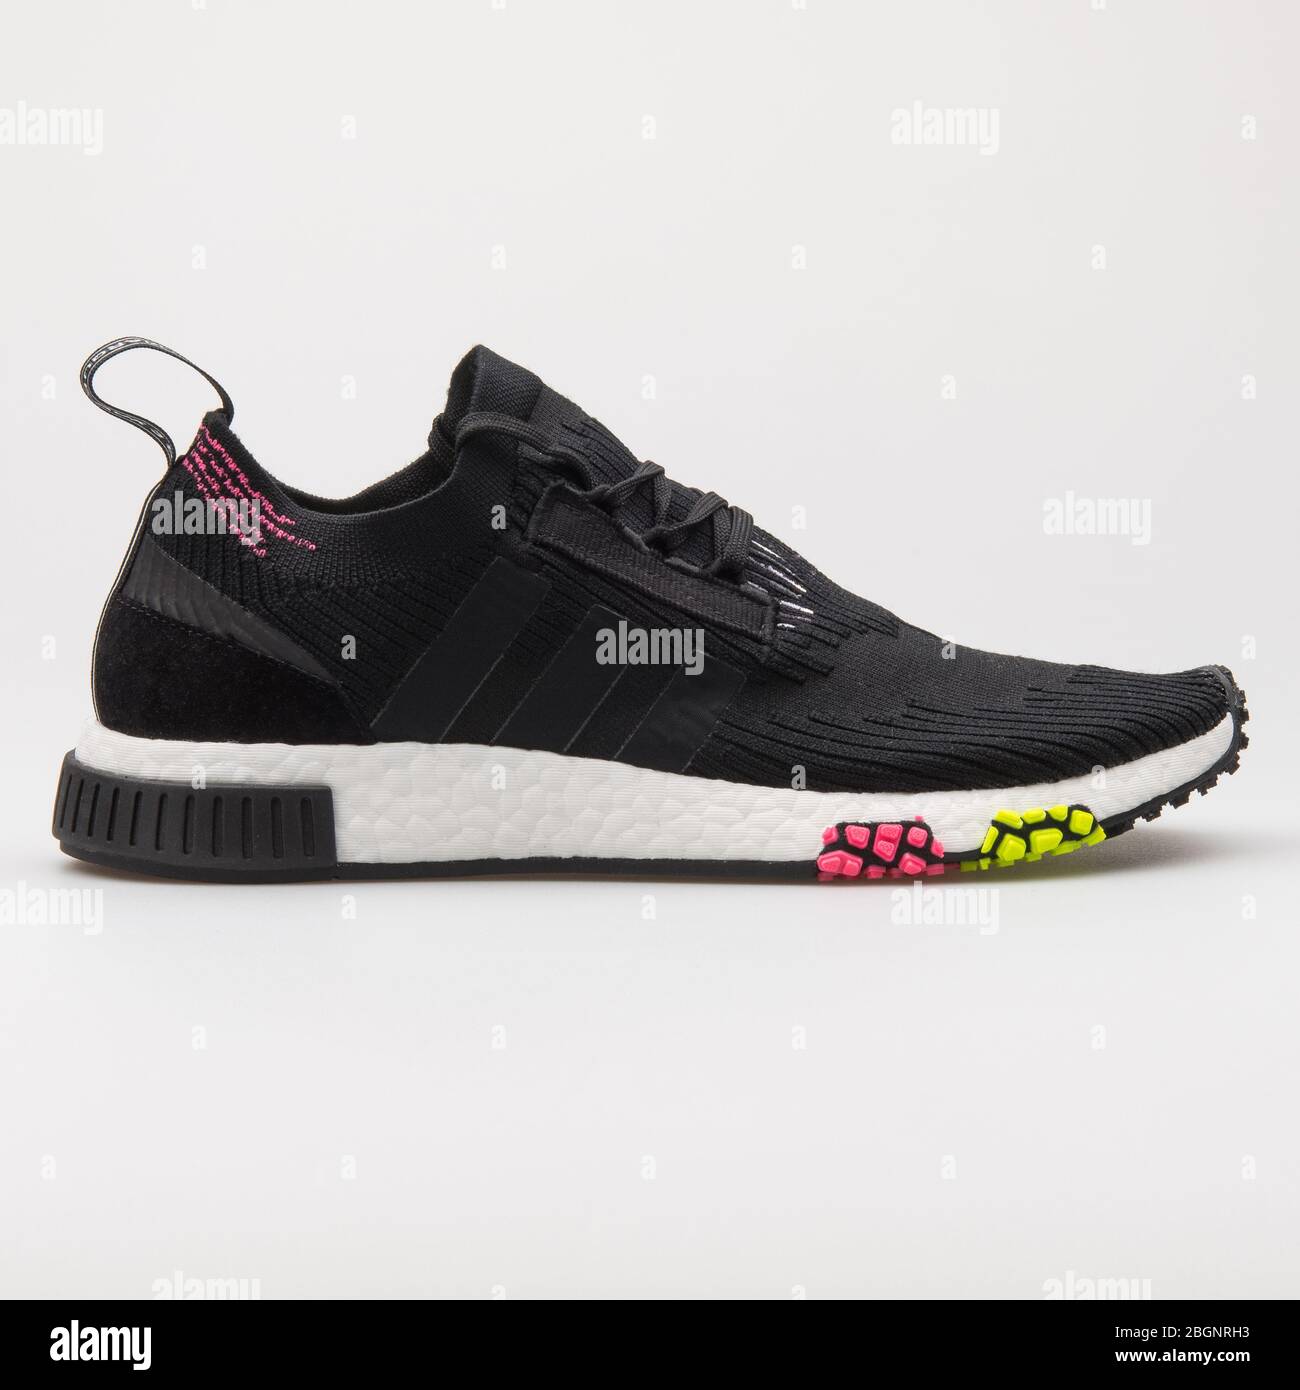 VIENNA, AUSTRIA - AUGUST 24, 2017: Adidas NMD Racer PK Primeknit Core  black, pink and yellow sneaker on white background Stock Photo - Alamy